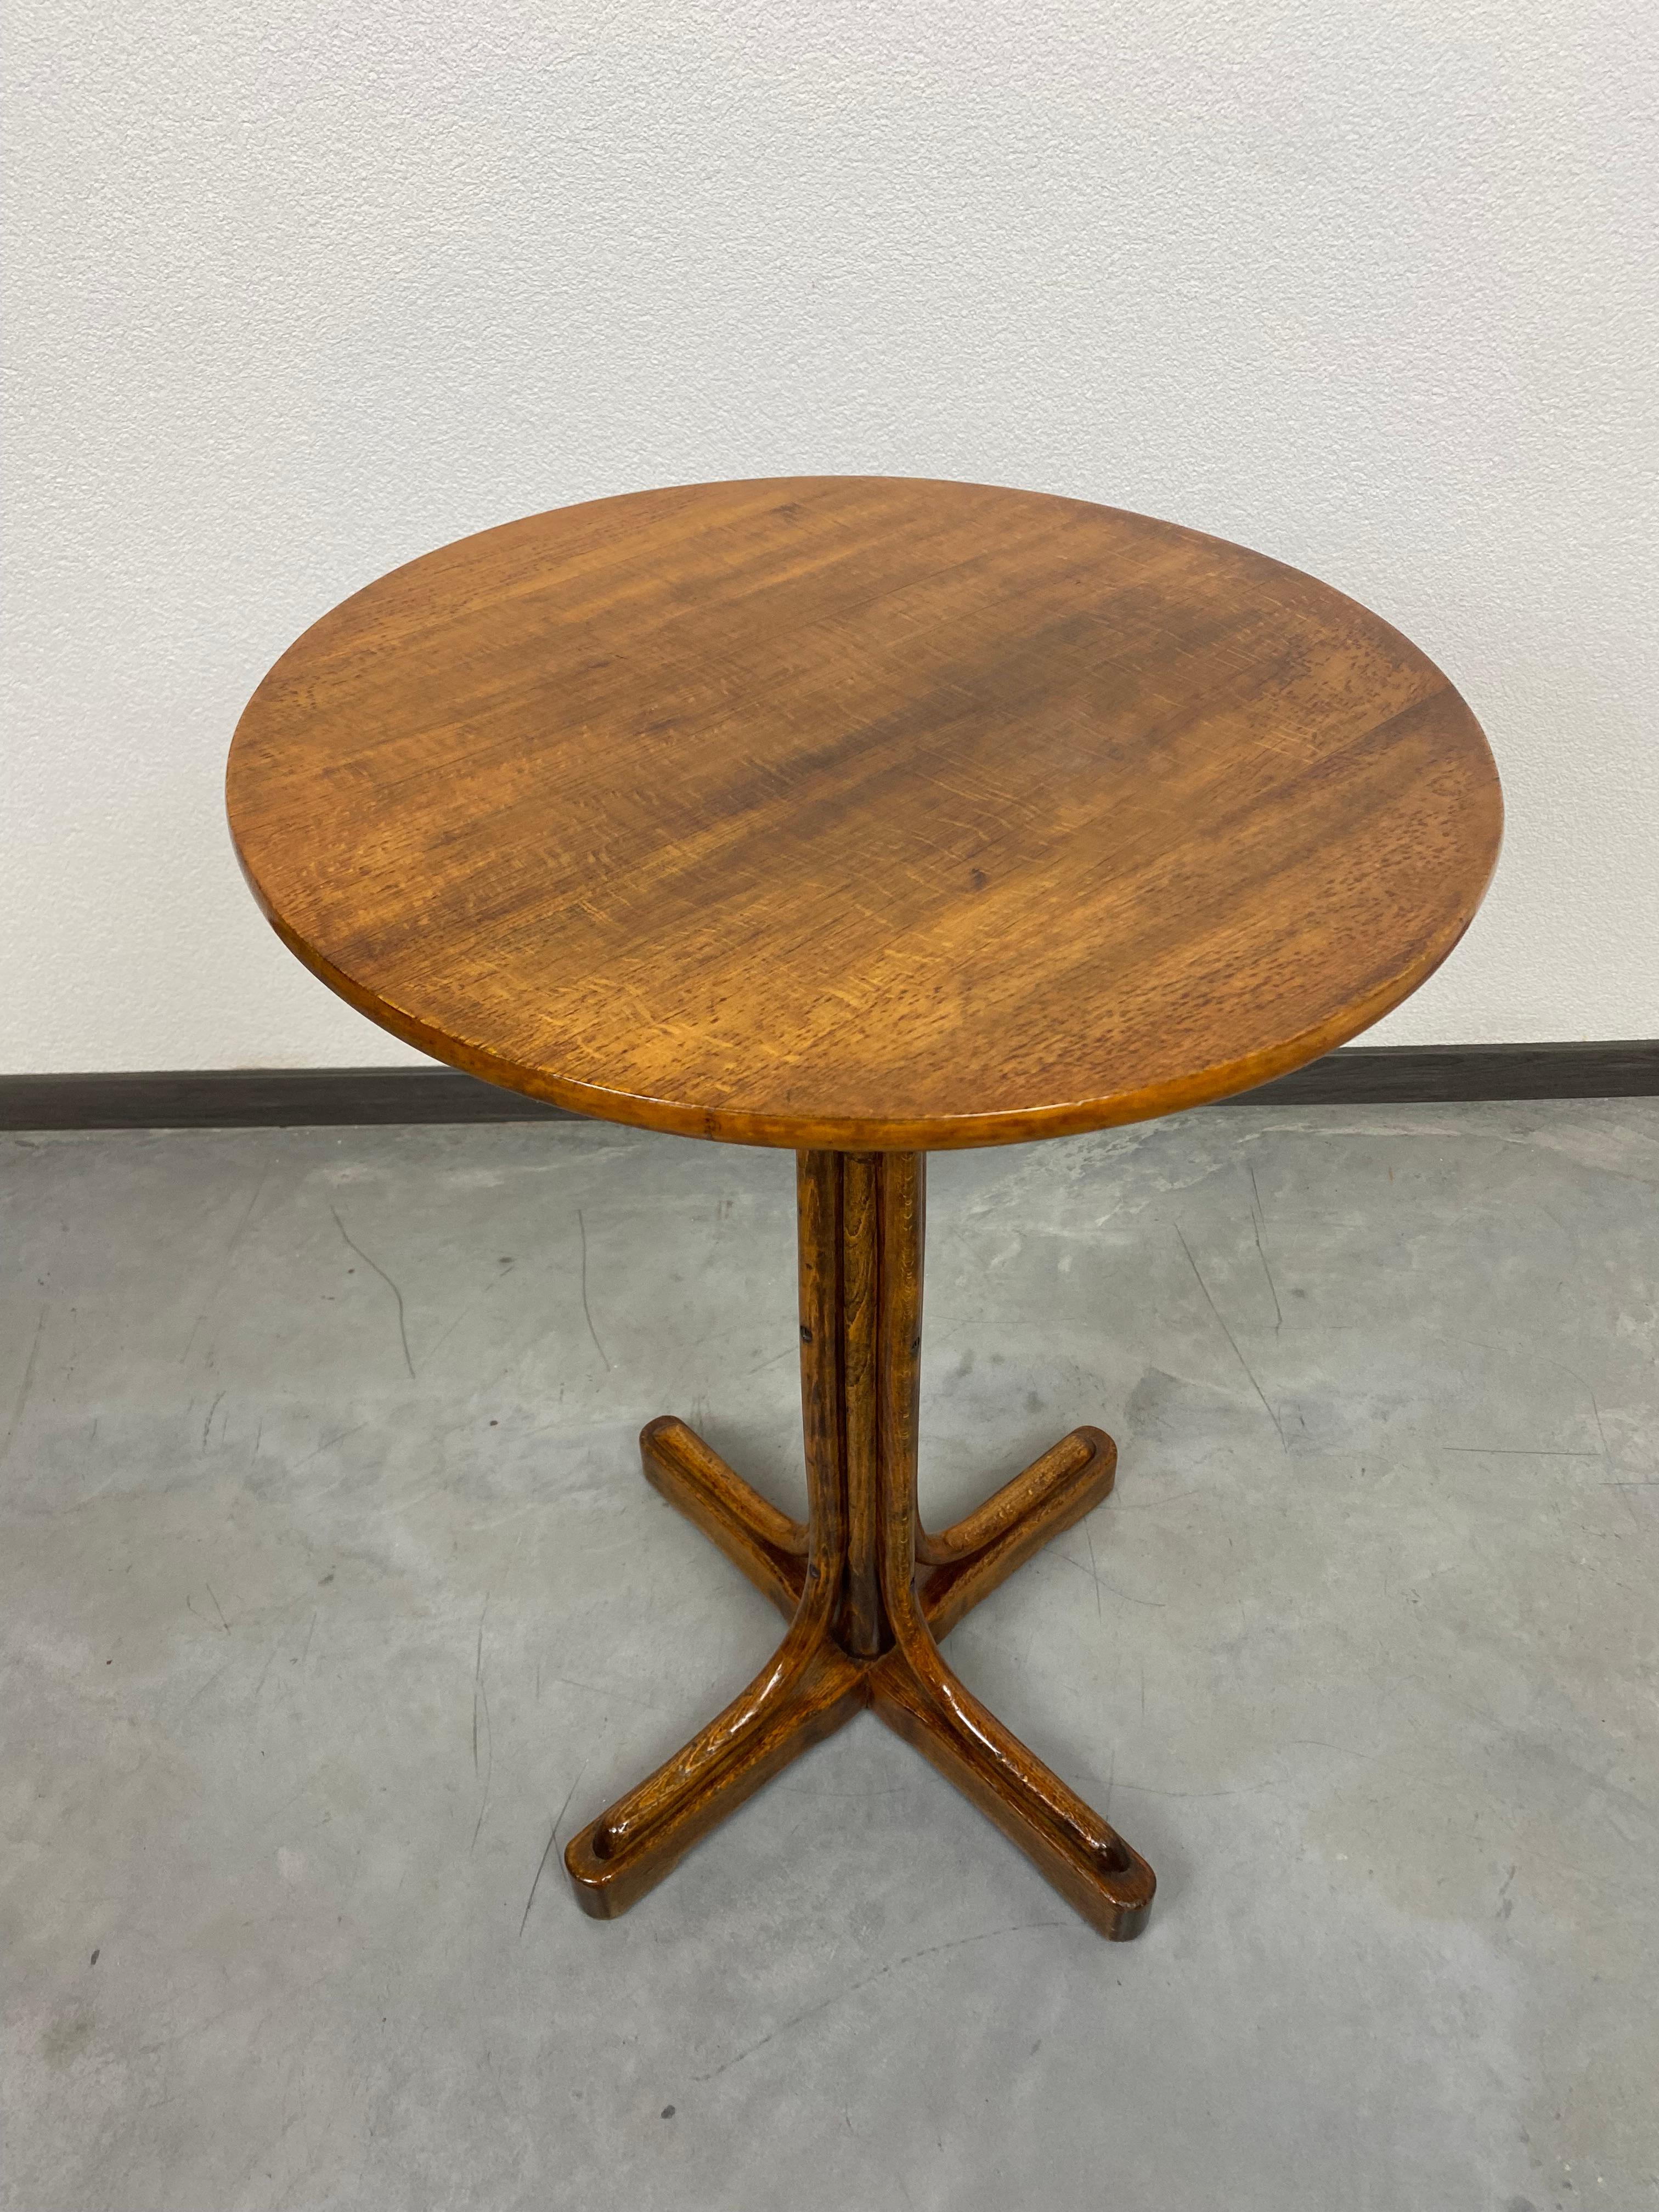 Vienna Secession Round Table by Thonet